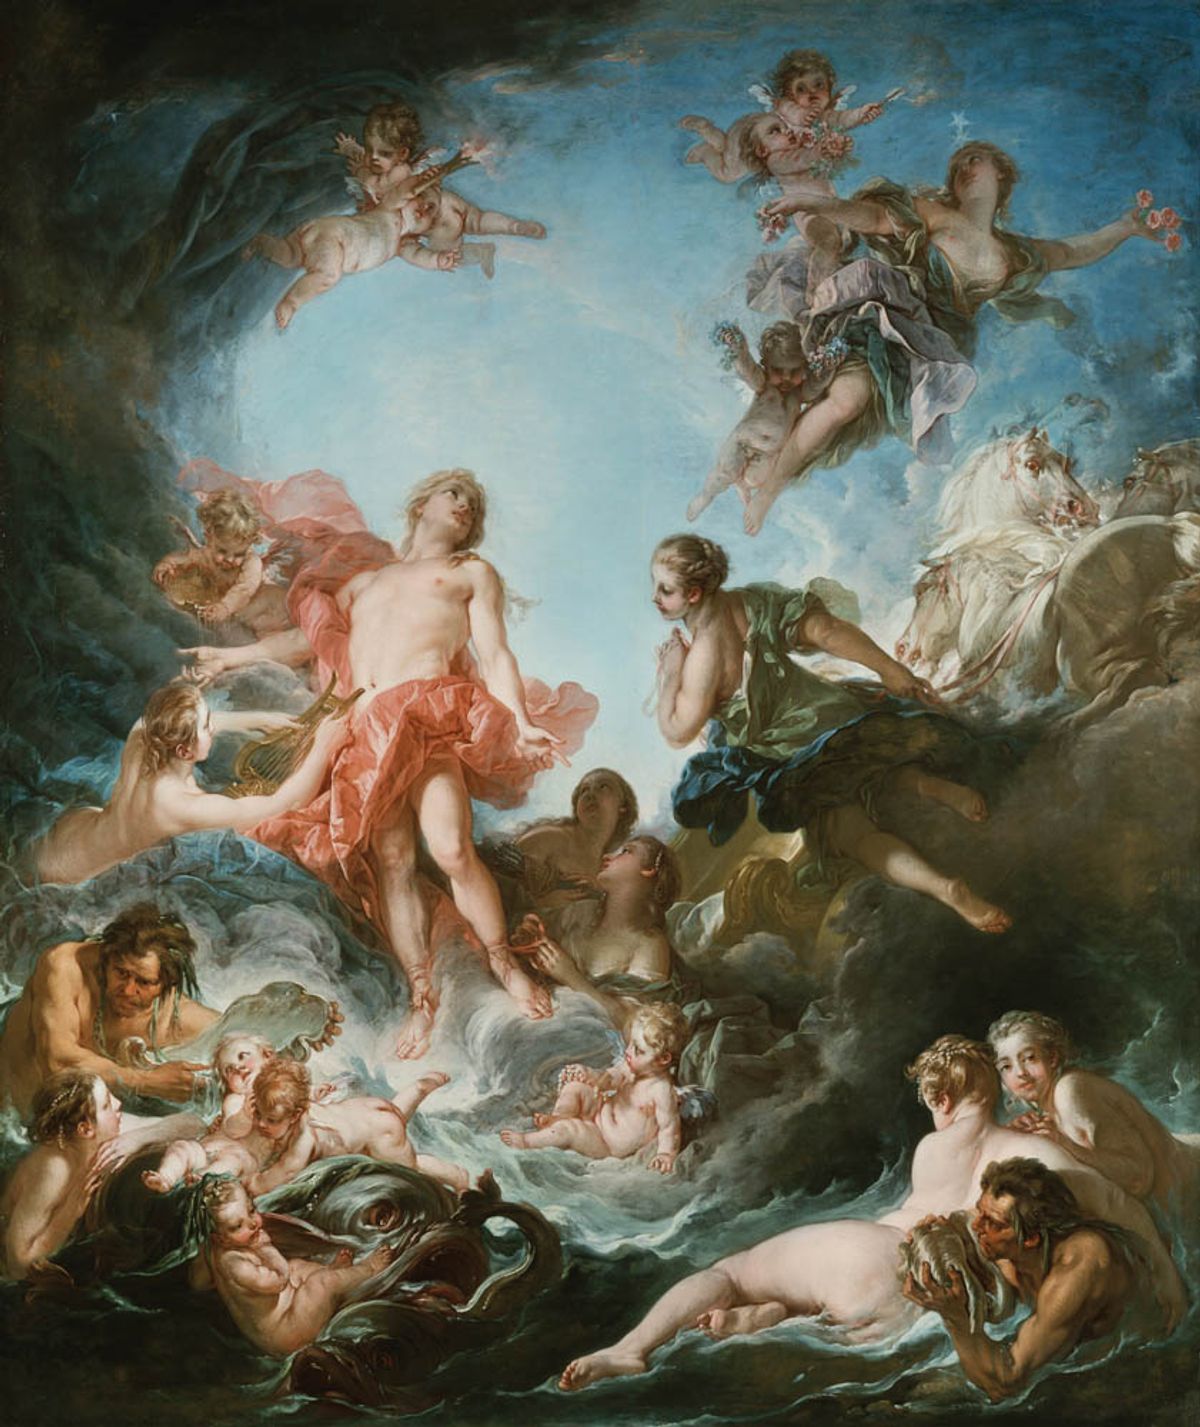 In François Boucher’s The Rising of the Sun, the Rococo artist swathes Apollo, god of the sun and symbol of the French kings, in pink fabric Wallace Collection